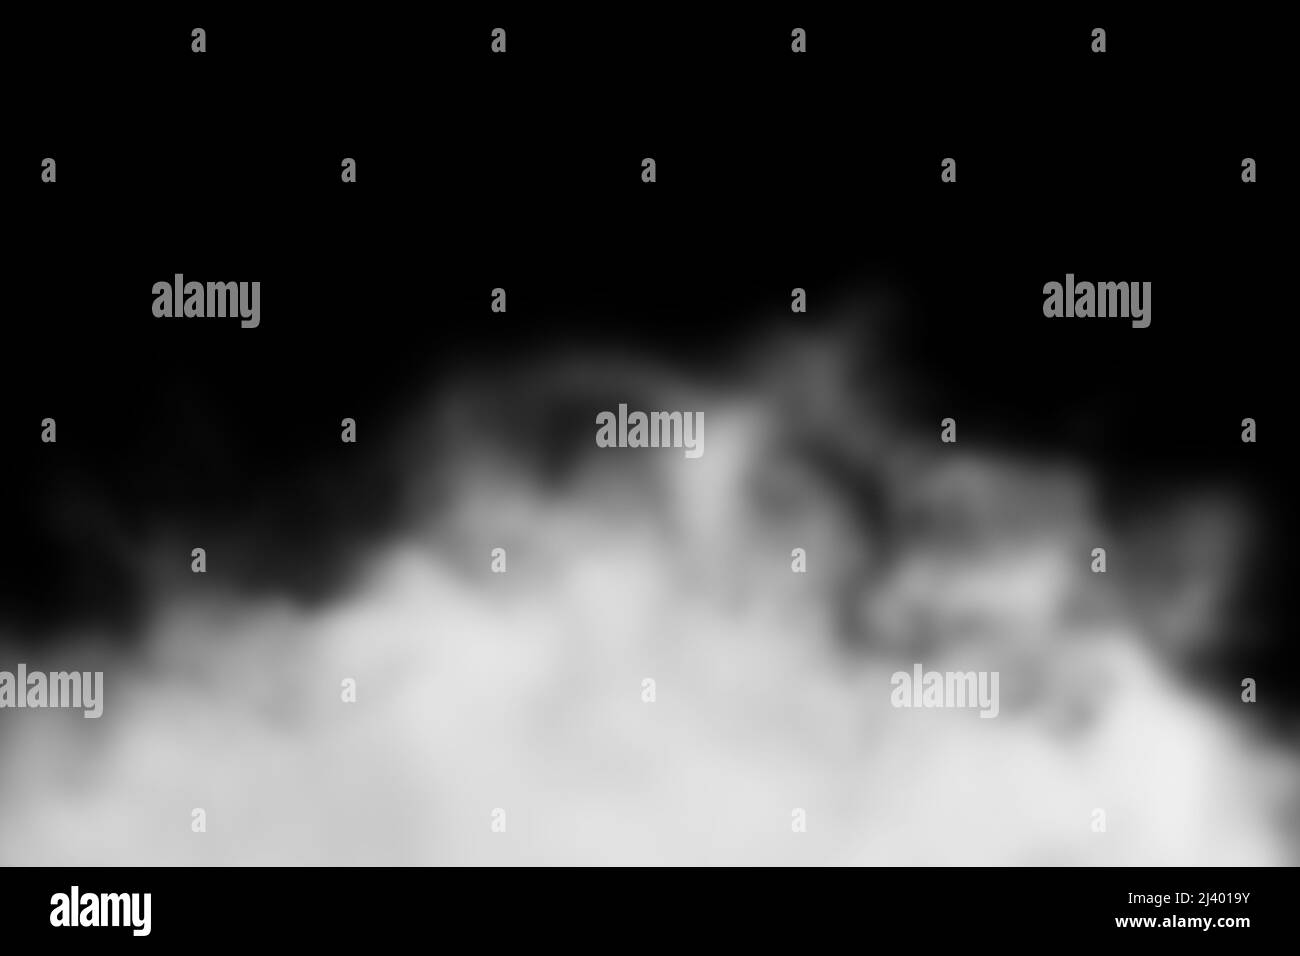 blurred smoke on black background realistic smoke overlay for different projects design background for promo, trailer, titles, text, opener backdrop Stock Photo